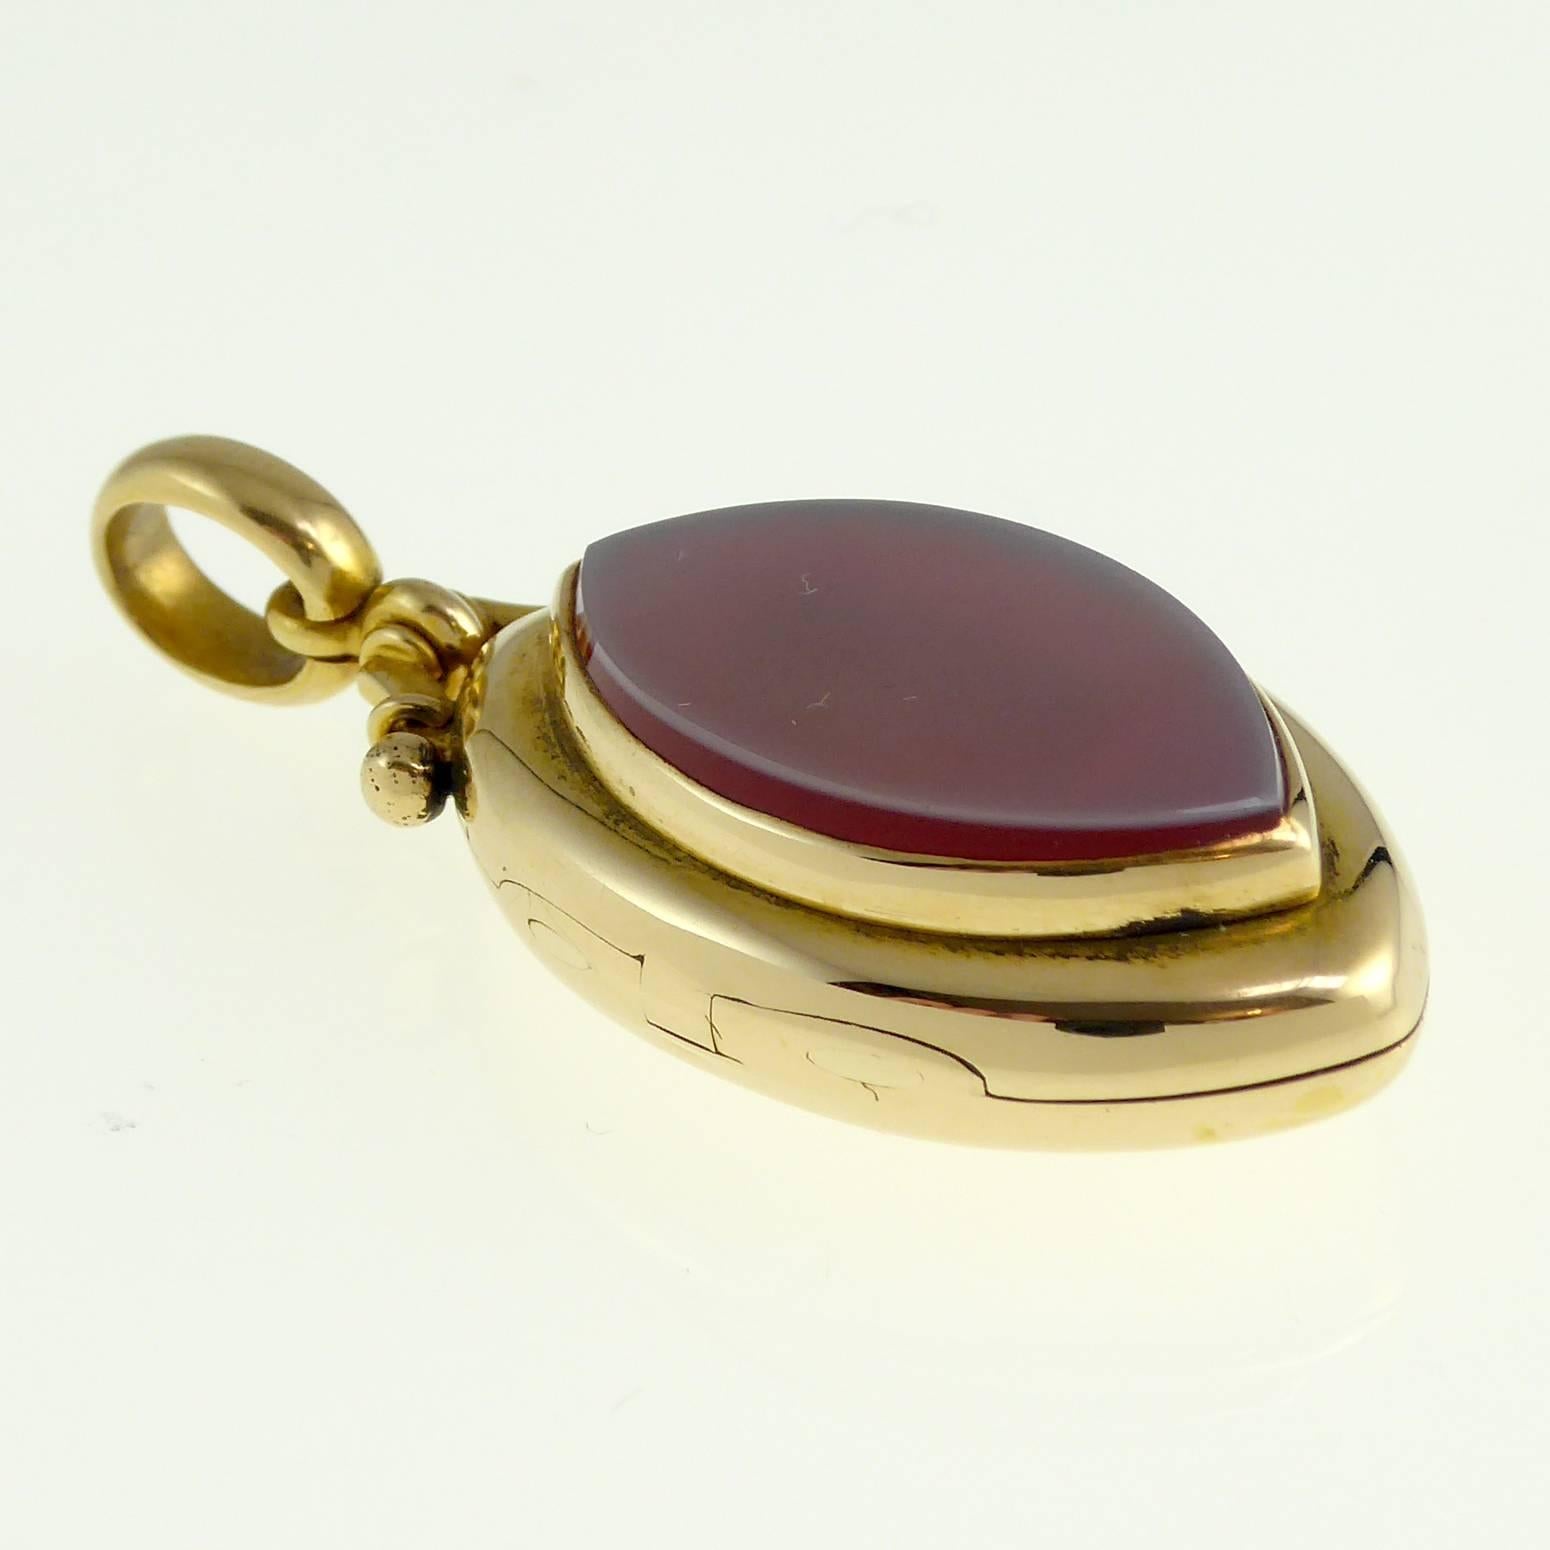 A very neat  and easy to wear Vicorian picture locket in a marquise shape with a raised platform to the front which has been set with a carnelian cut to mirror the shape of the pendant. 

The rounded edges of the pendant give a very tactile quality